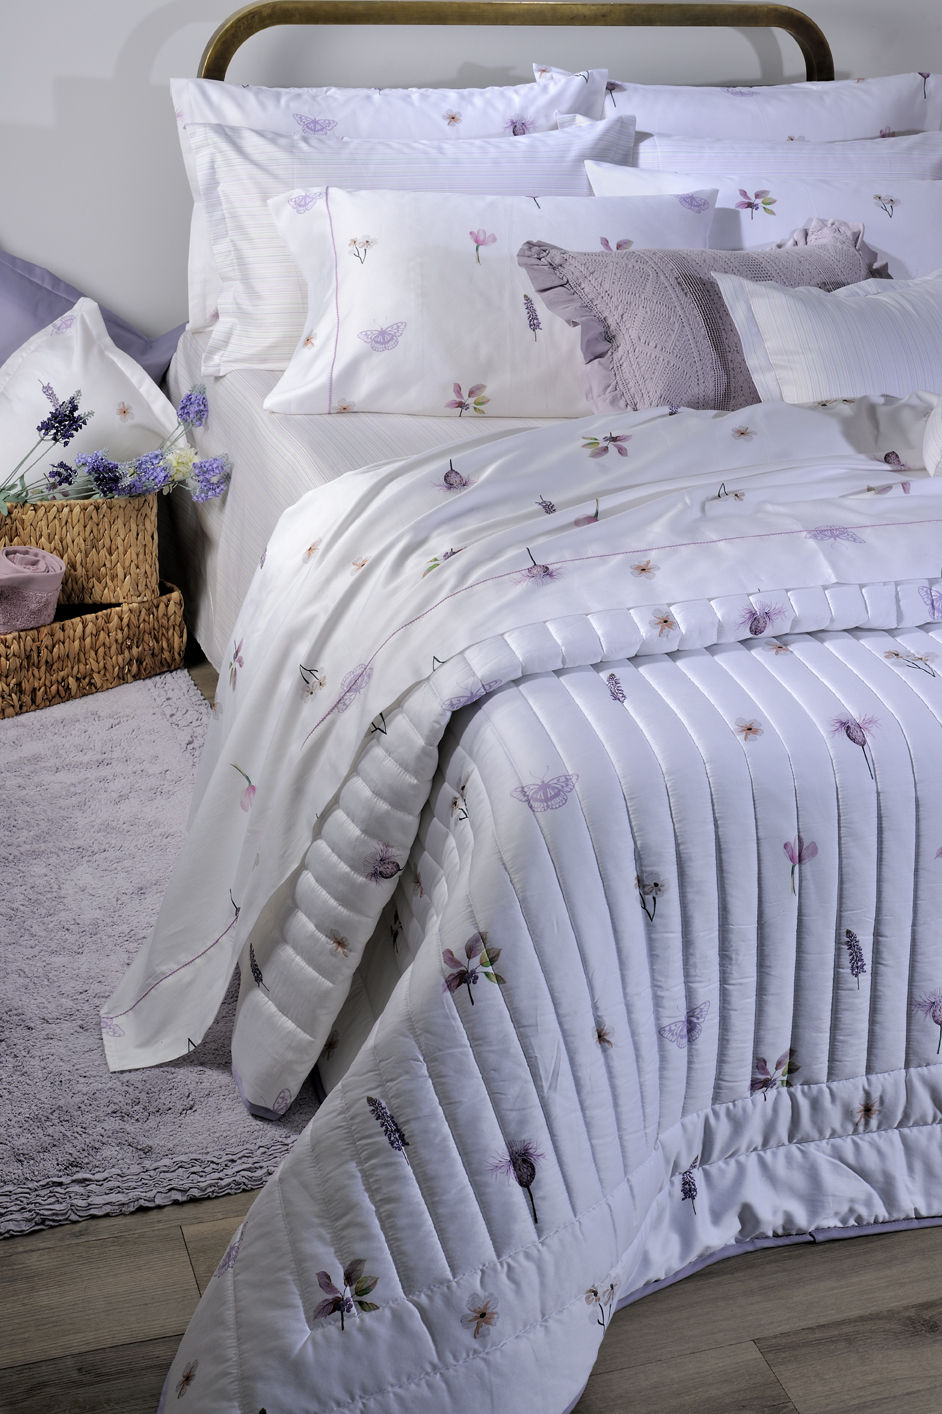 Queen Sheets Set Fitted 844 Happiness image